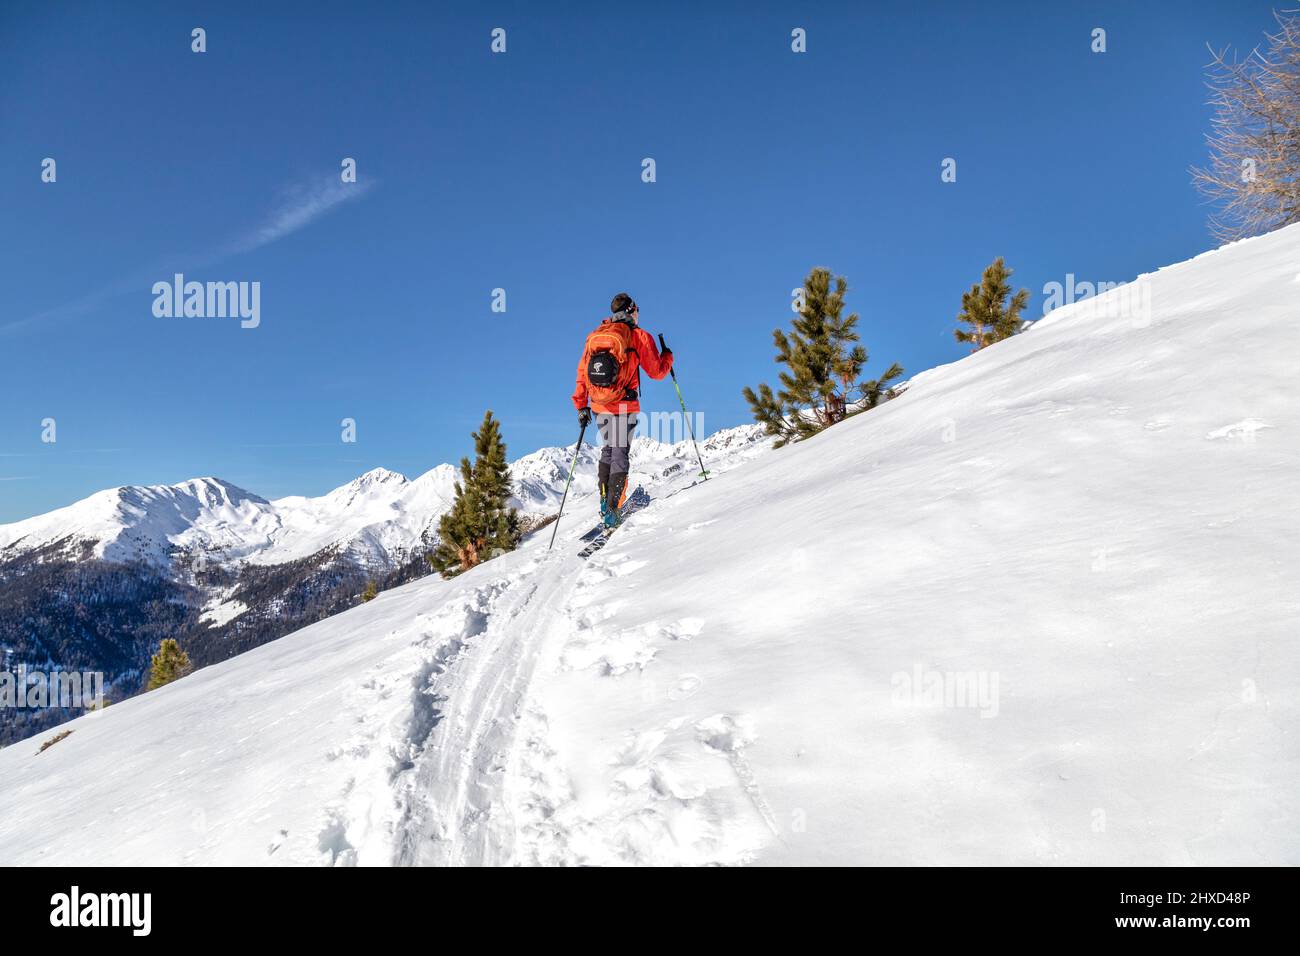 Europe, Italy, Alto Adige / Südtirol, province of Bolzano / Bozen, Casies valley / Gsiesertal, ski mountaineer uphill to Spielbühel, in the background the mountains of Villgraten (Hoher mann and Fellhorn) Stock Photo